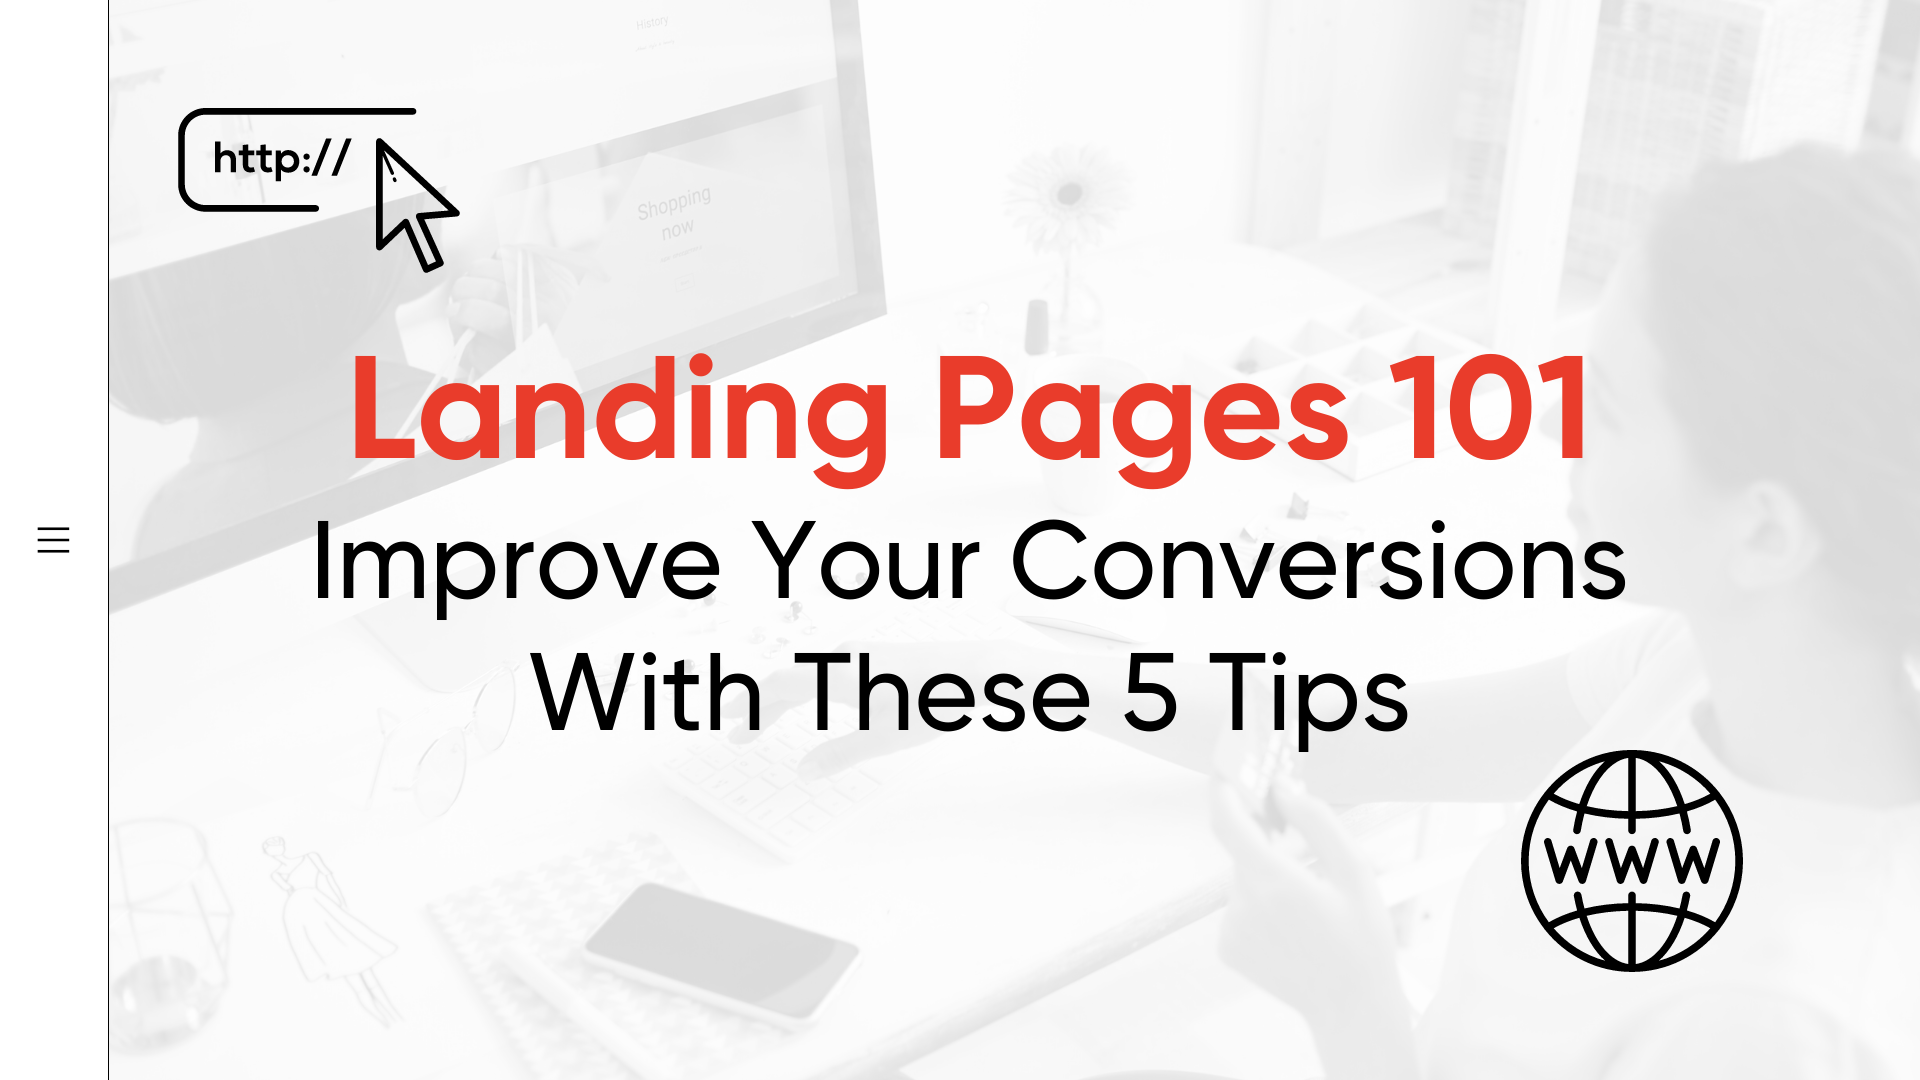 Landing Pages 101: Improve Your Conversions With These 5 Tips